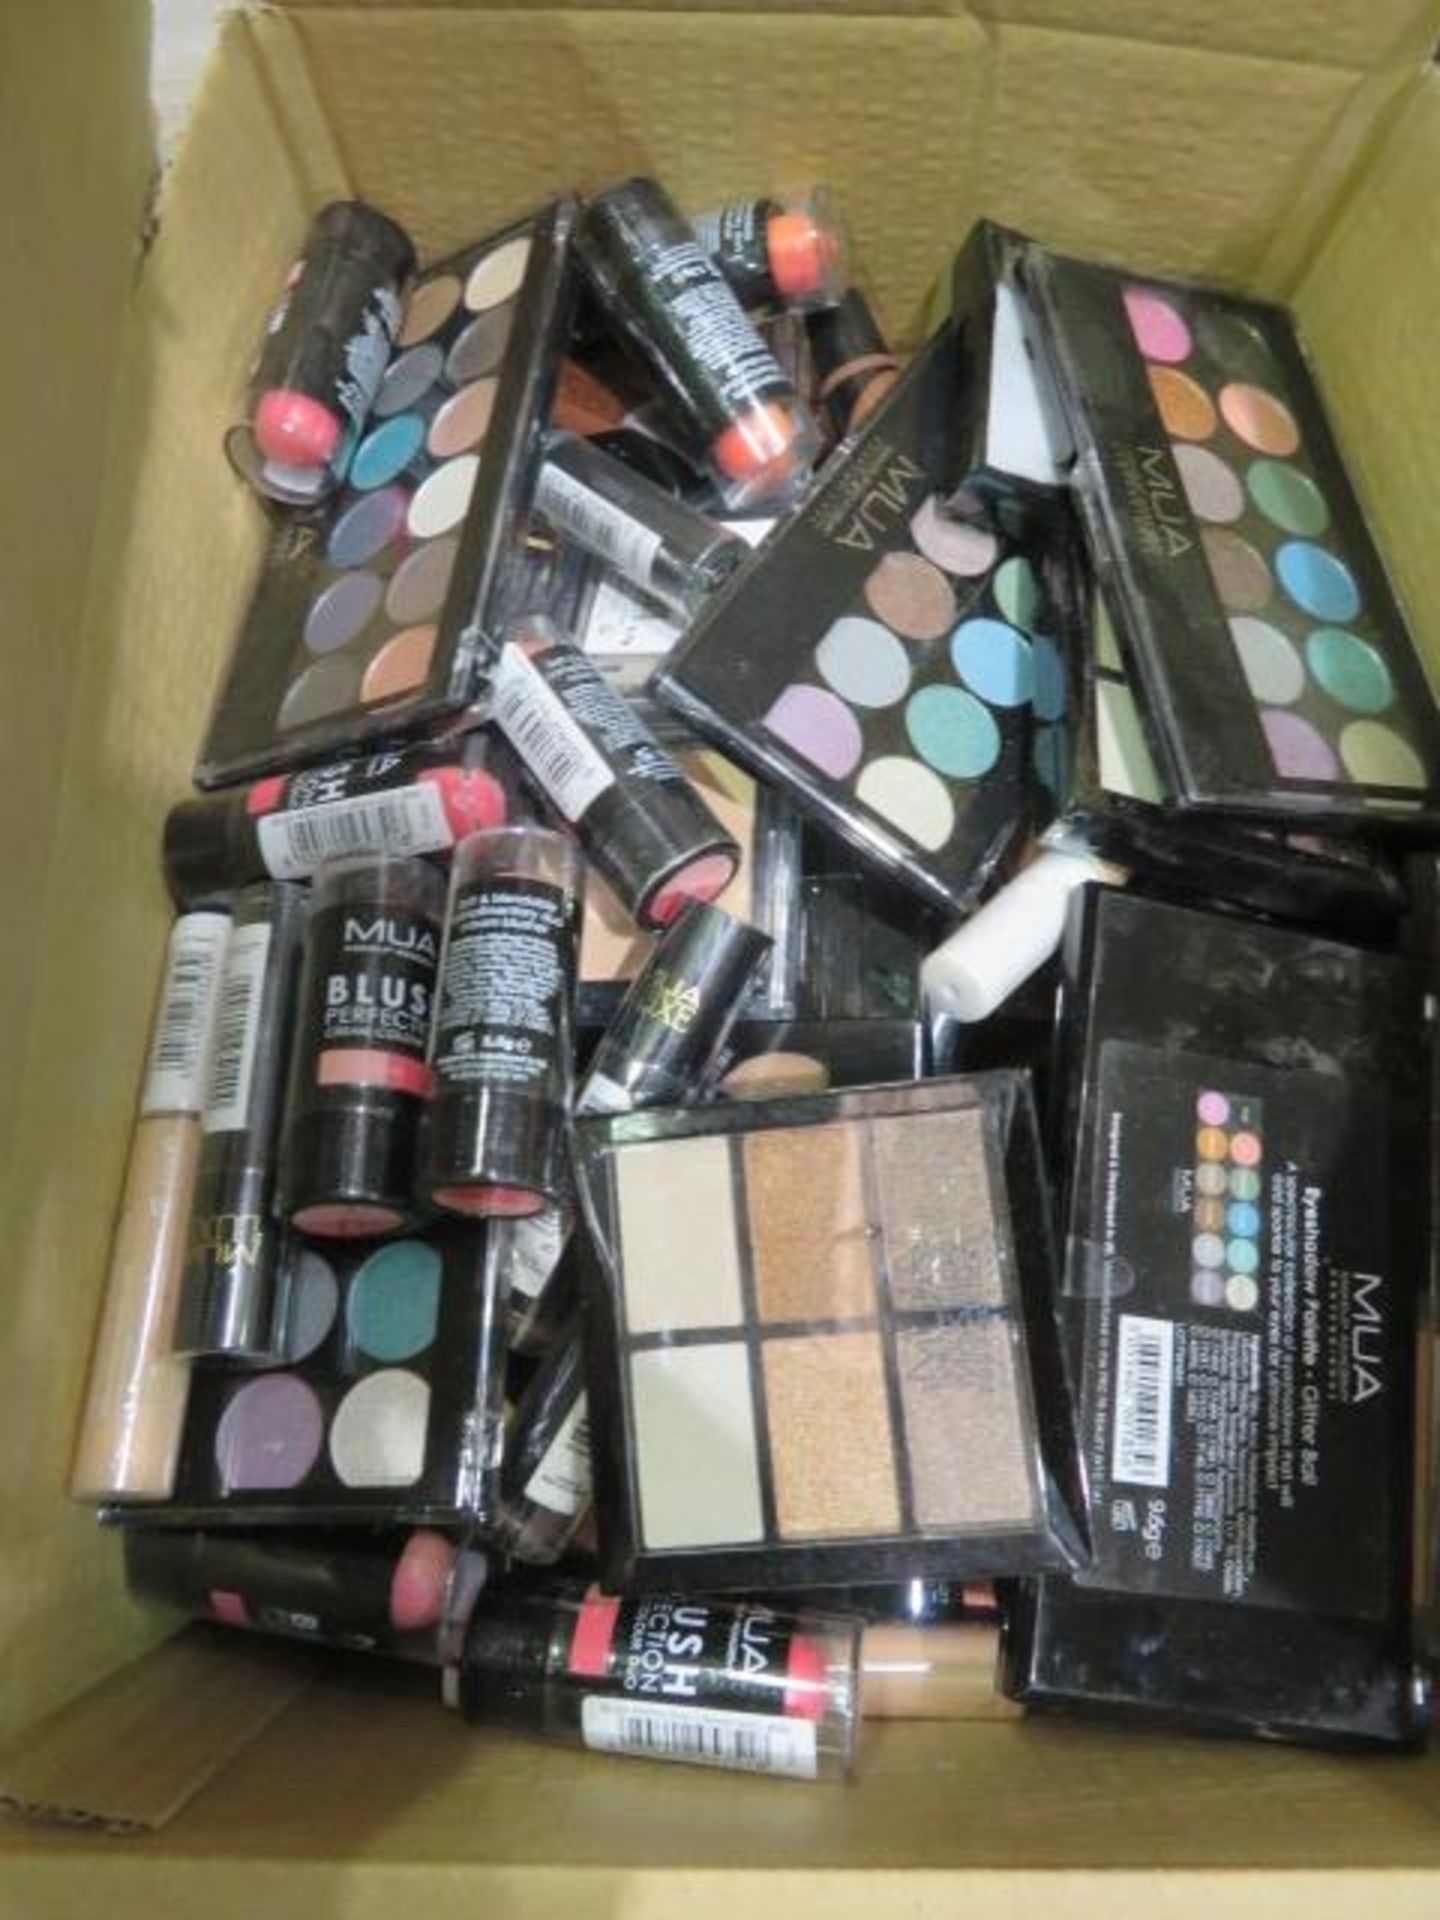 Circa. 200 items of various new make up acadamy make up to include: glitter ball eye shadow palette,